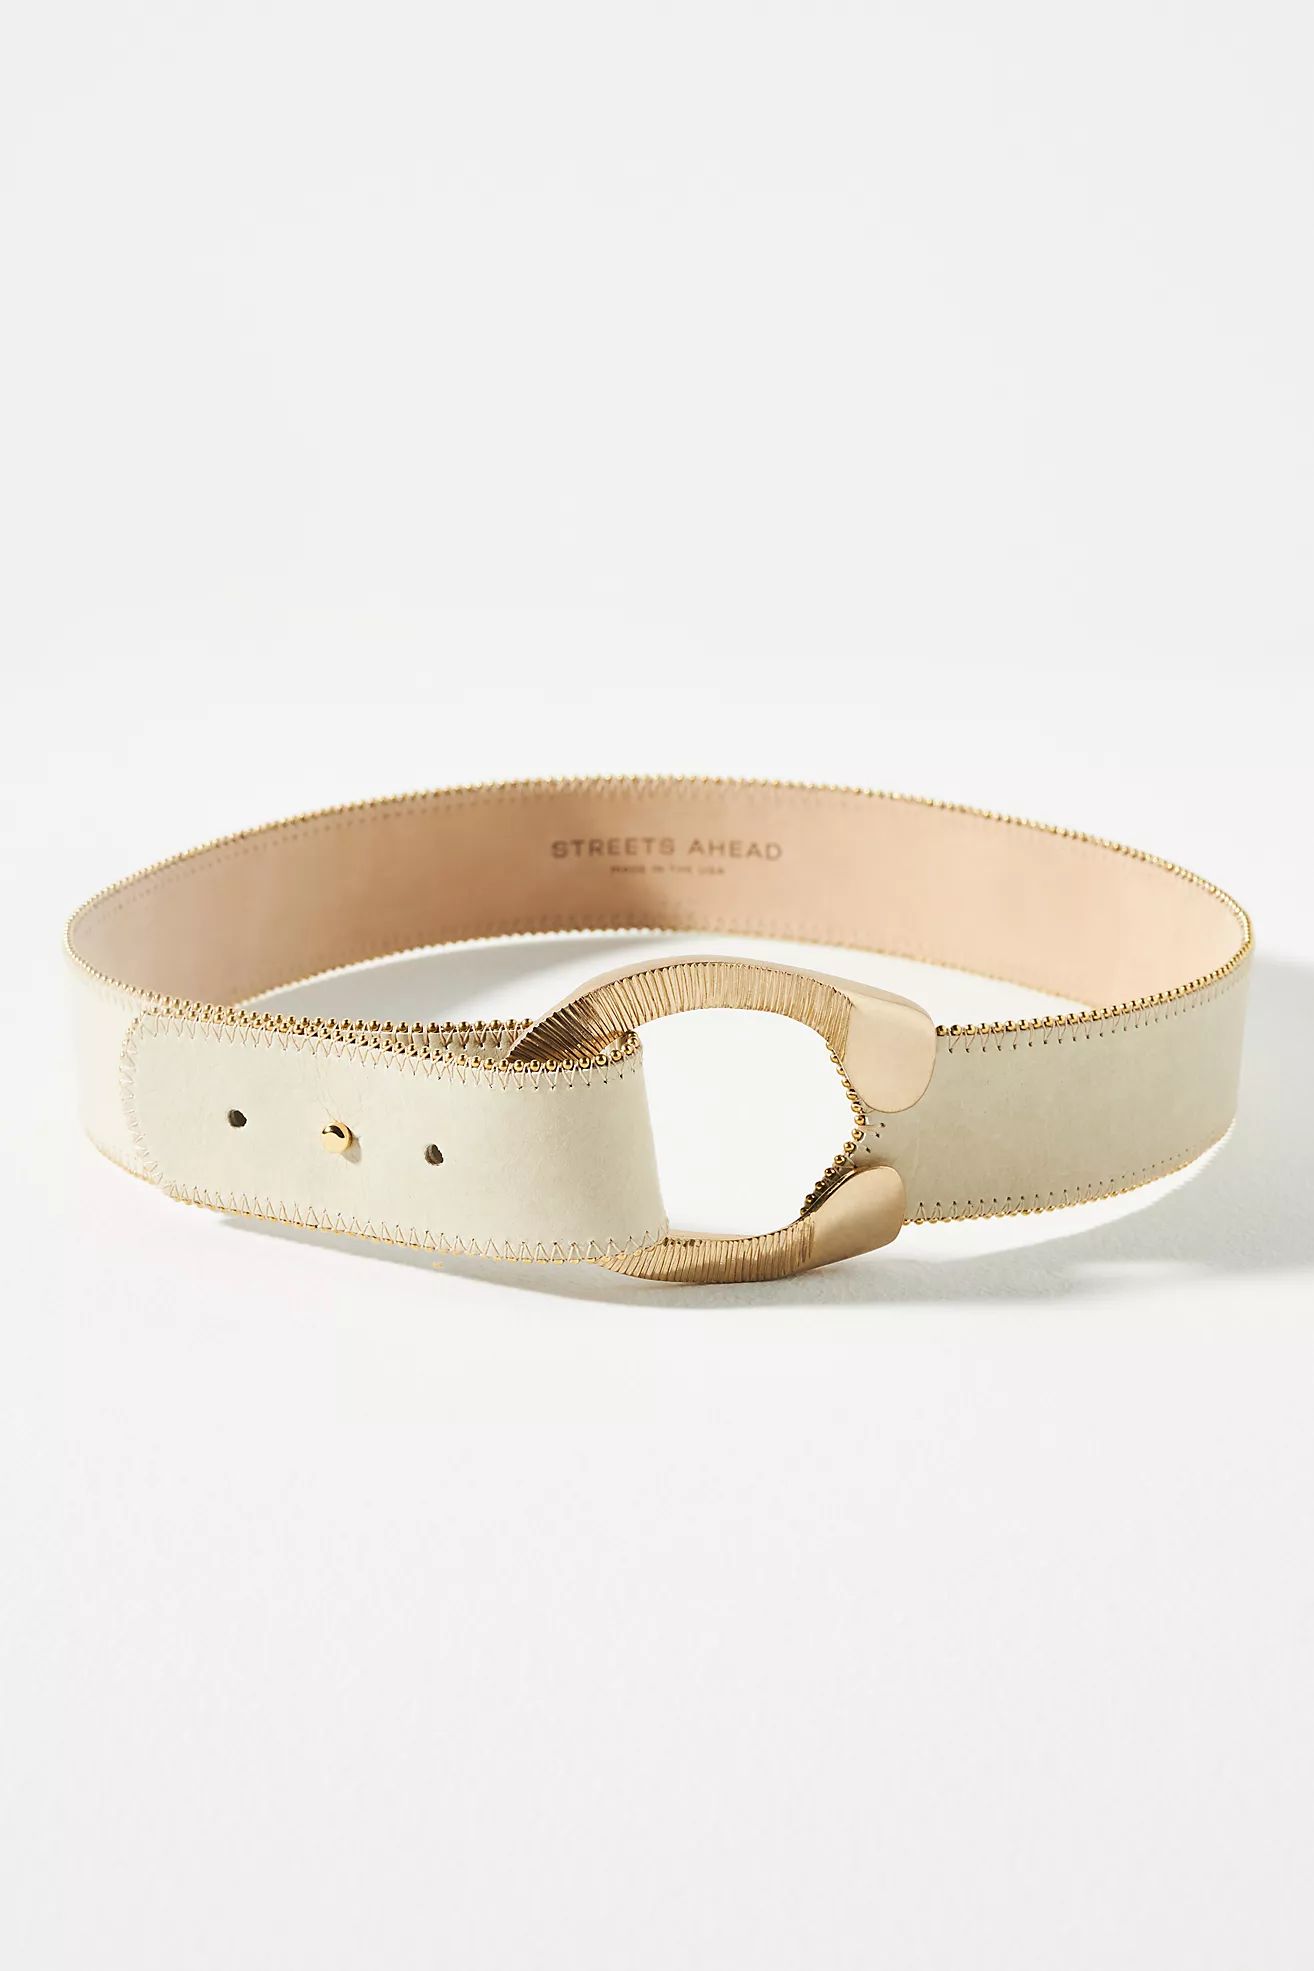 Streets Ahead Gold Ring Belt | Anthropologie (US)